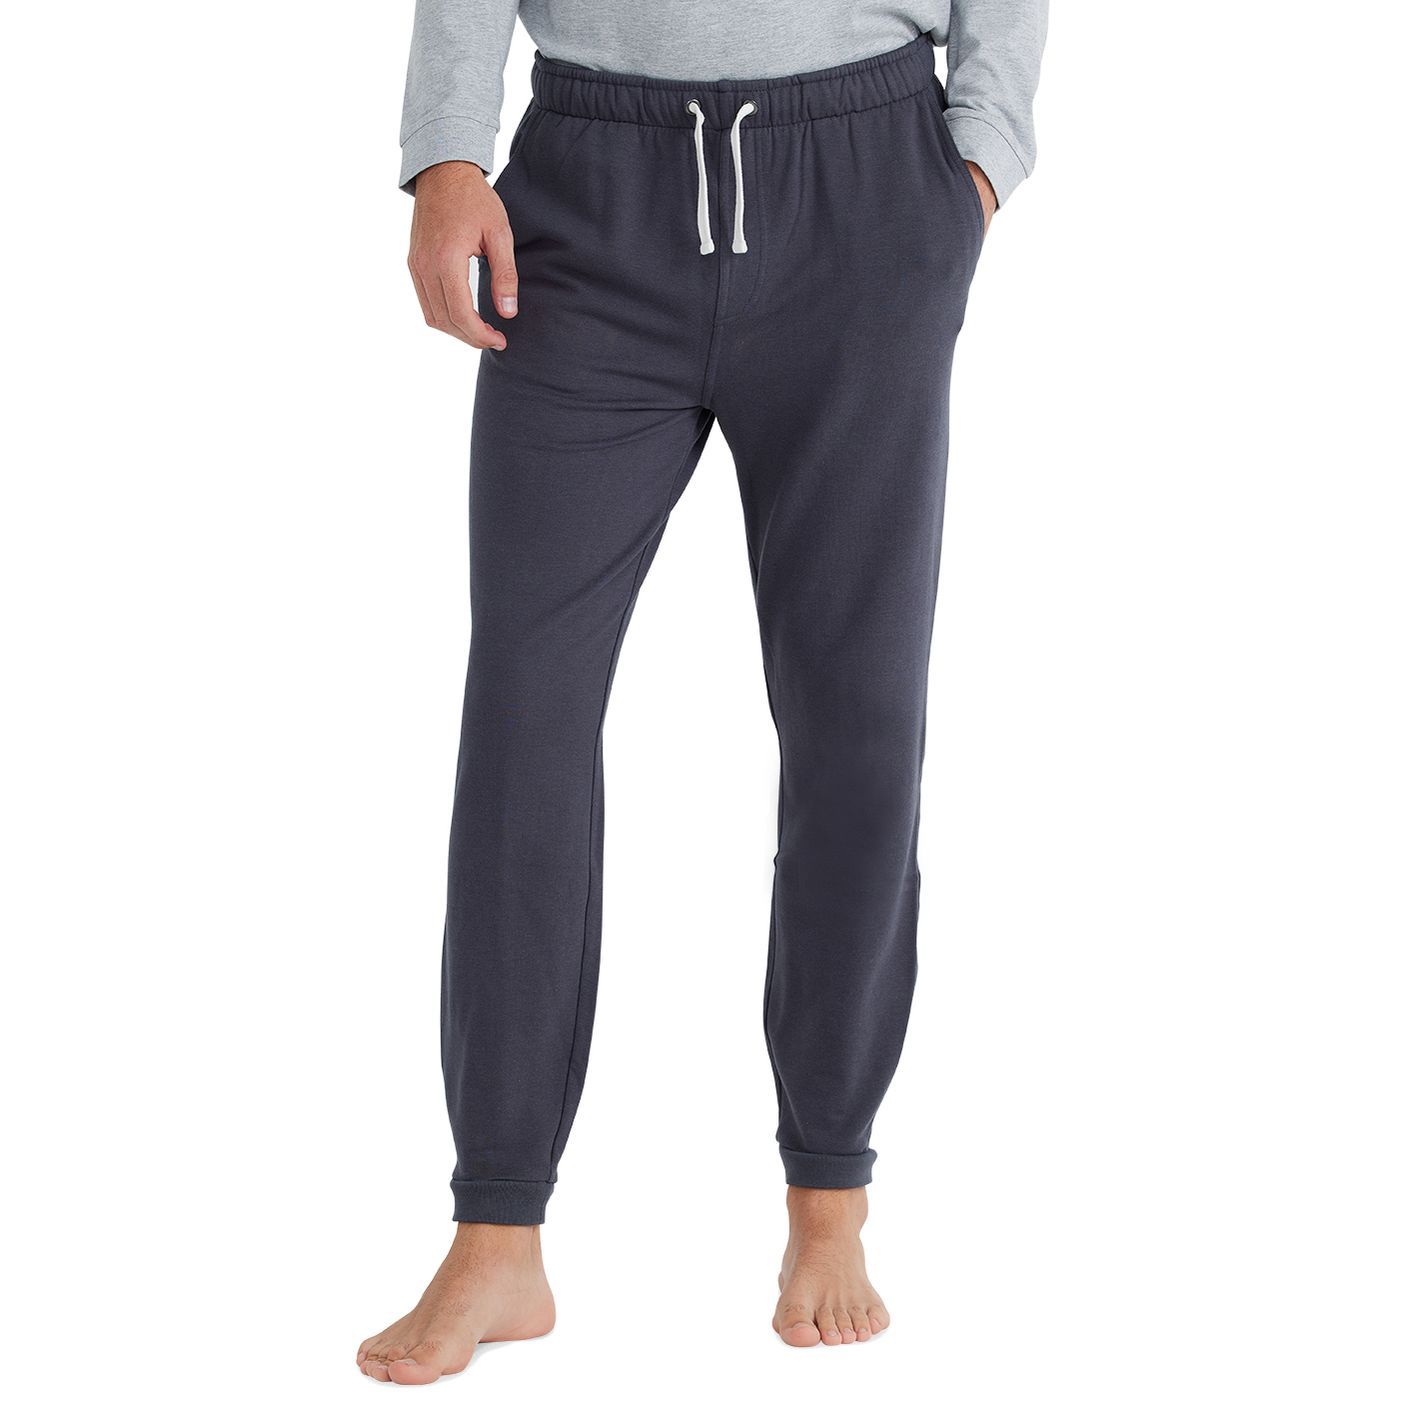 Free Fly Bamboo Heritage Fleece Jogger Graphite Image 1